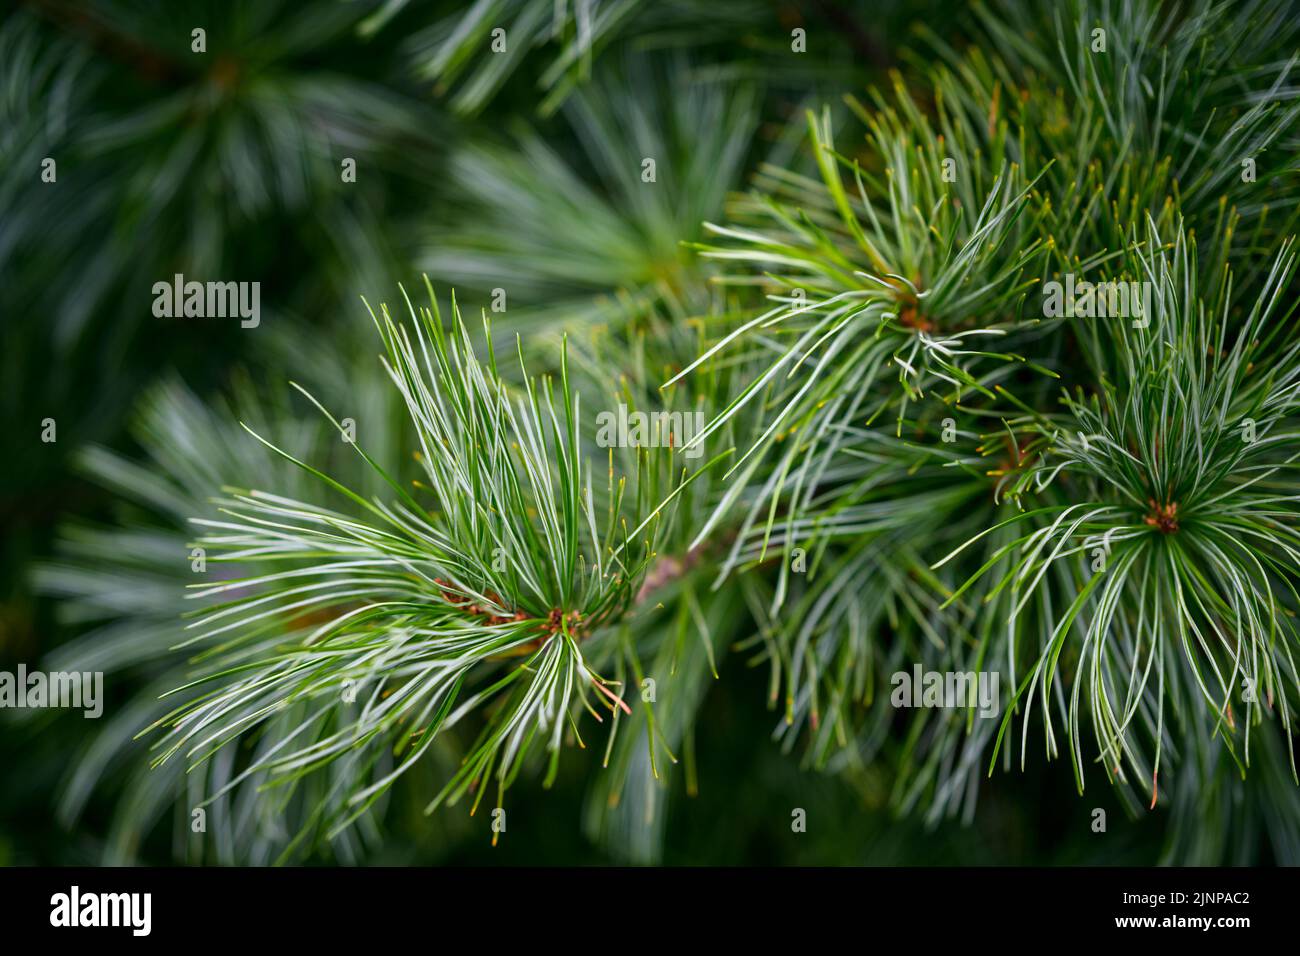 Korean pine branches at sunlight. Selective focus. Shallow depth of field. Stock Photo